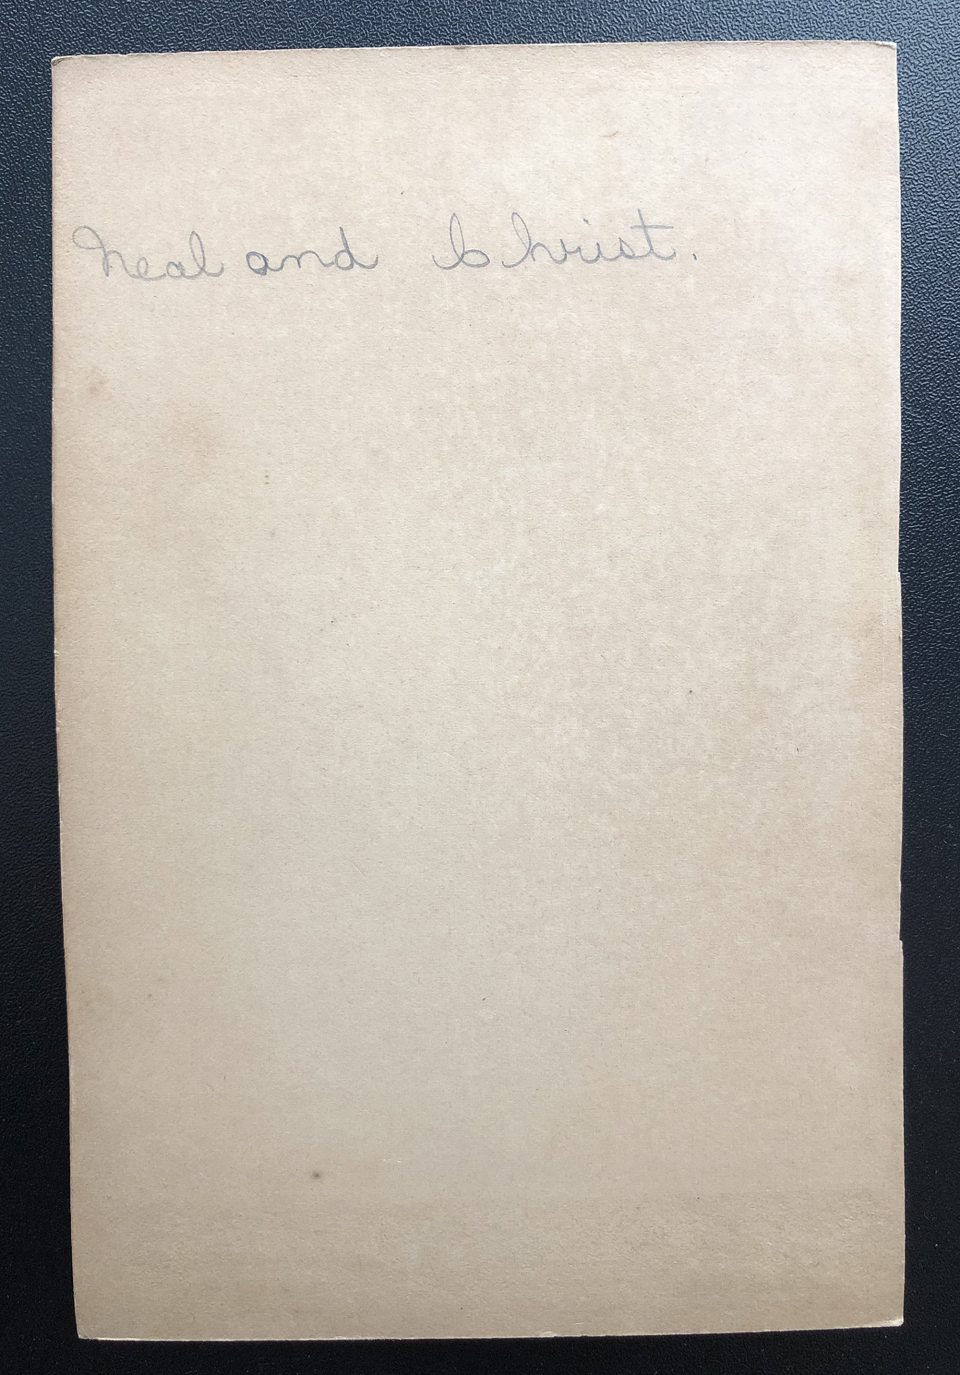 The back of the cabinet card photograph shows the handwritten names "Neal and Christ."